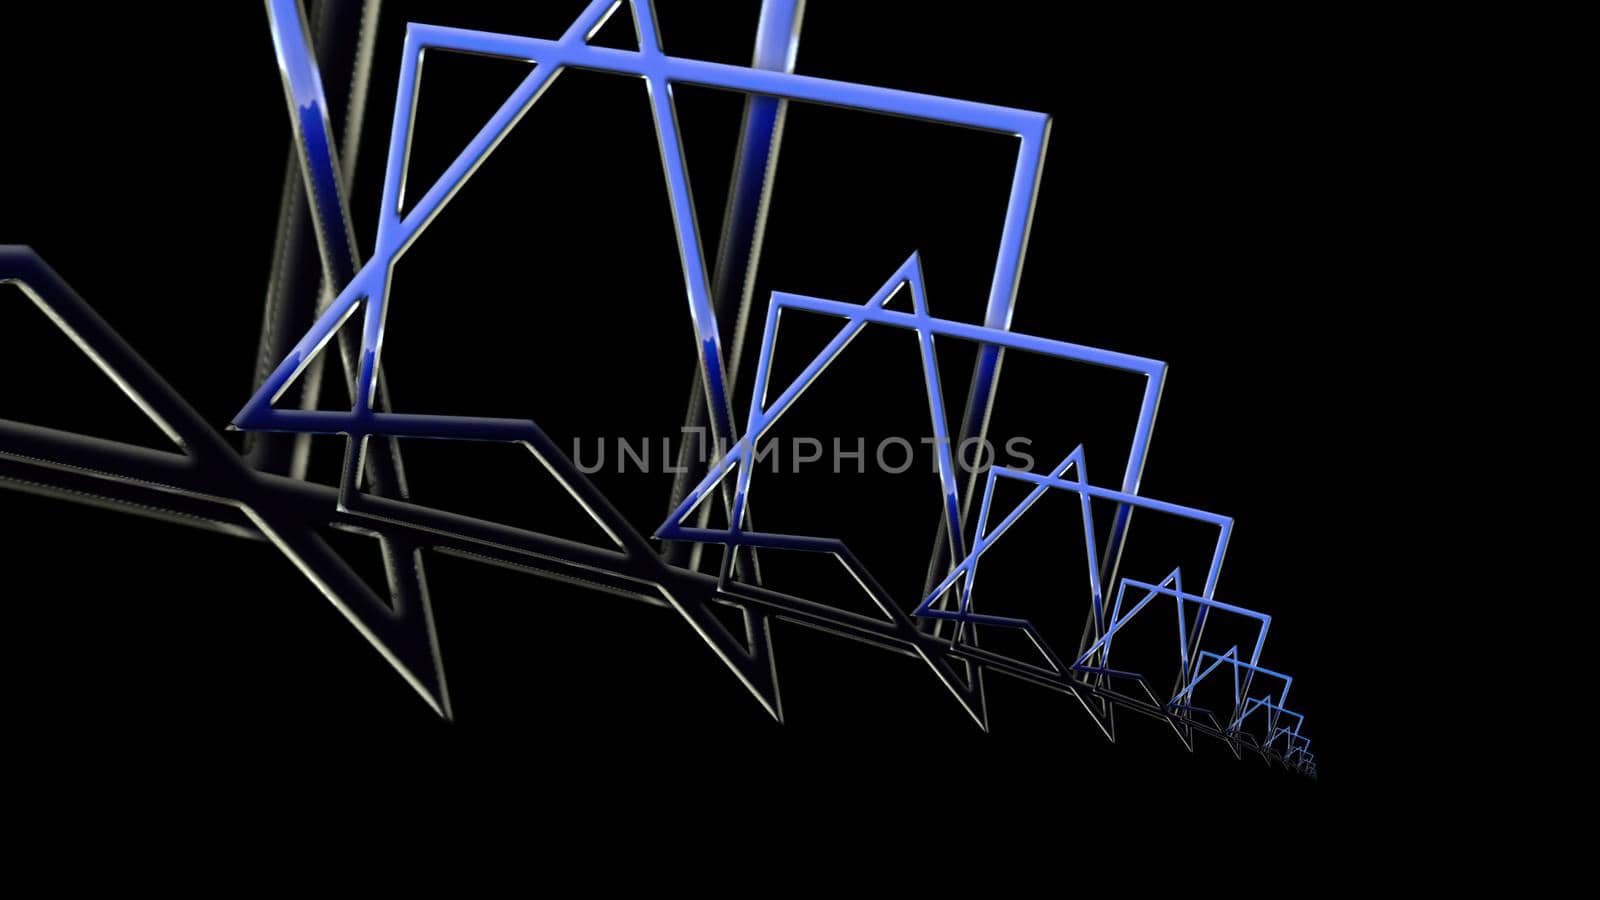 3d illustration - triangles and geometric patterns of blue lines on a black background by vitanovski